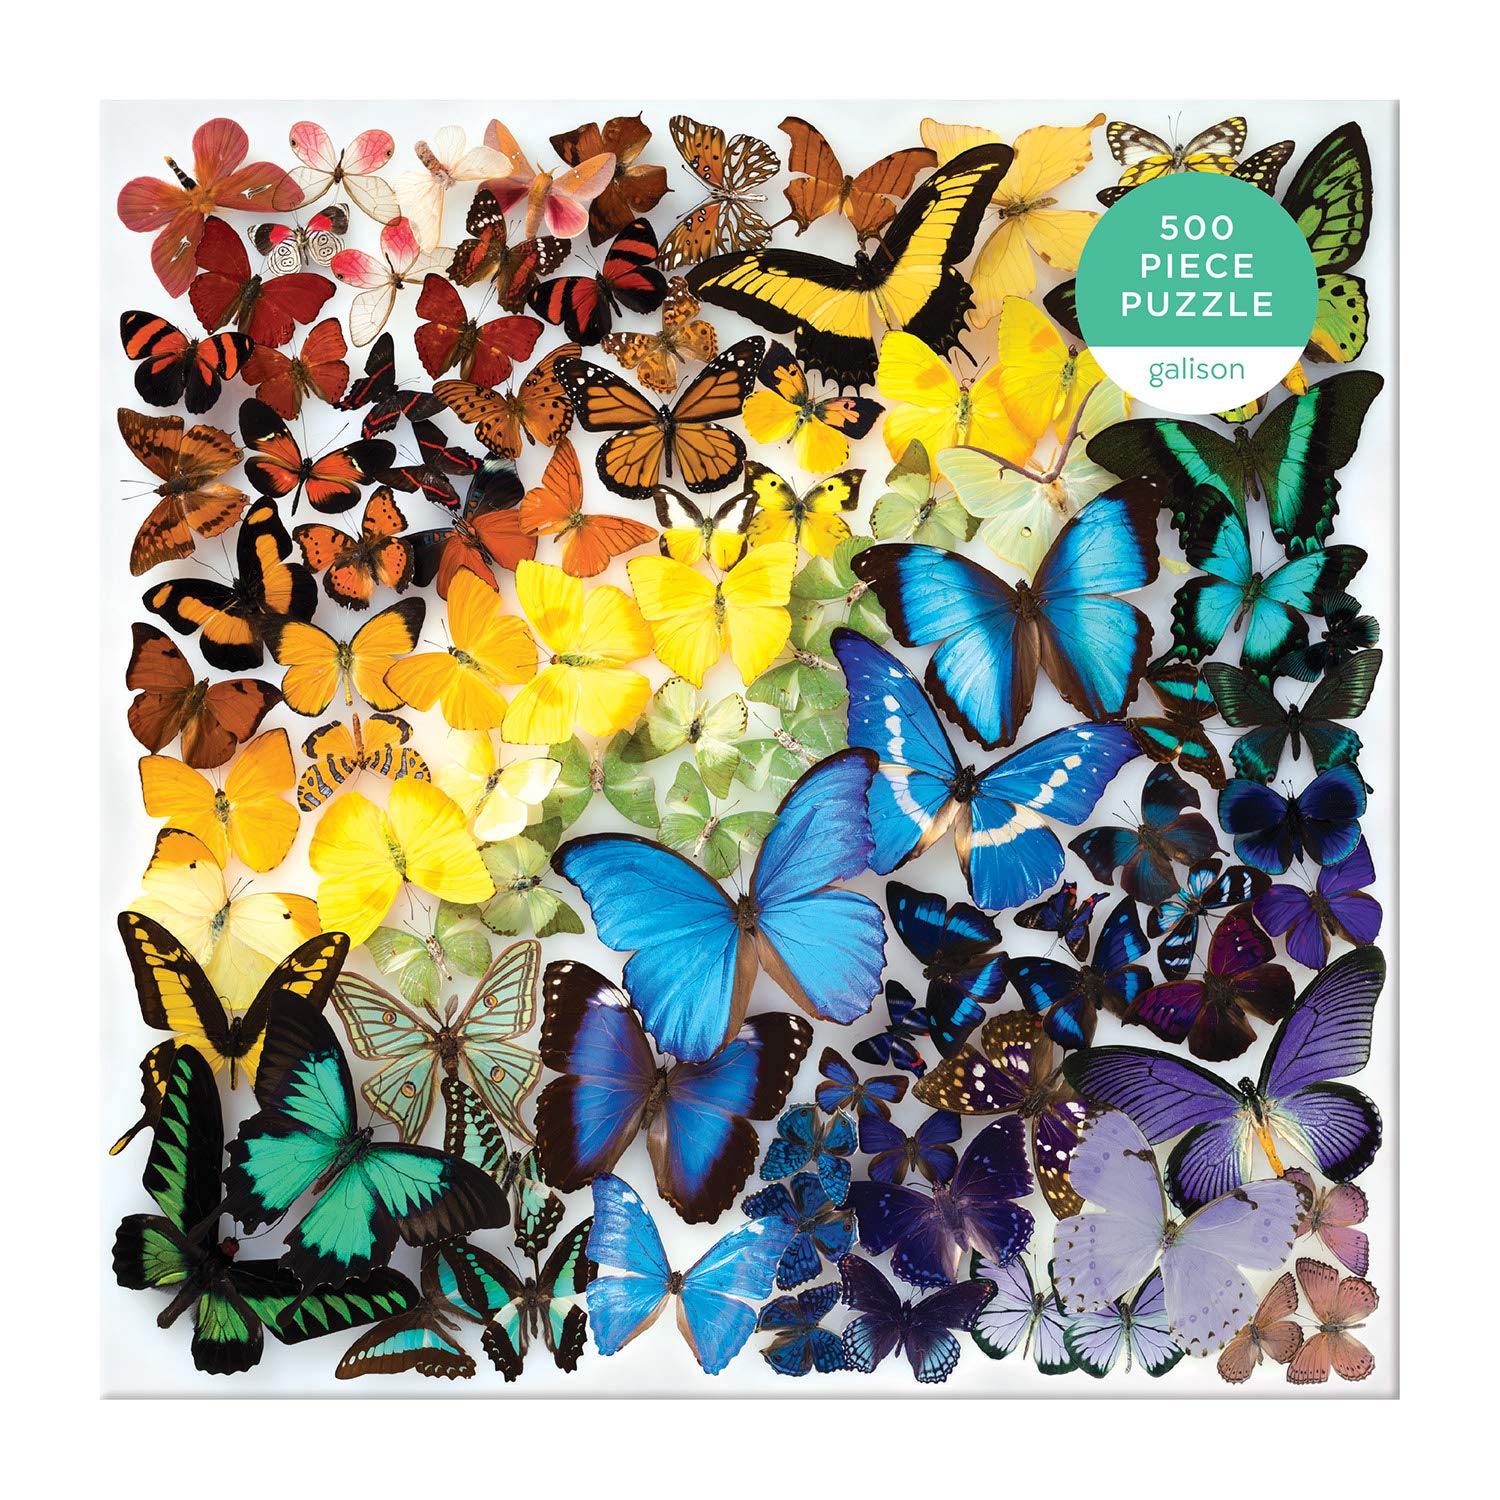 Galison Rainbow Butterflies Jigsaw Puzzle, 500 Pieces, 20”x20” – Features an Array of Butterflies in a Mesmerizing Rainbow of Color – Challenging, Perfect for Family Fun – Fun Indoor Activity